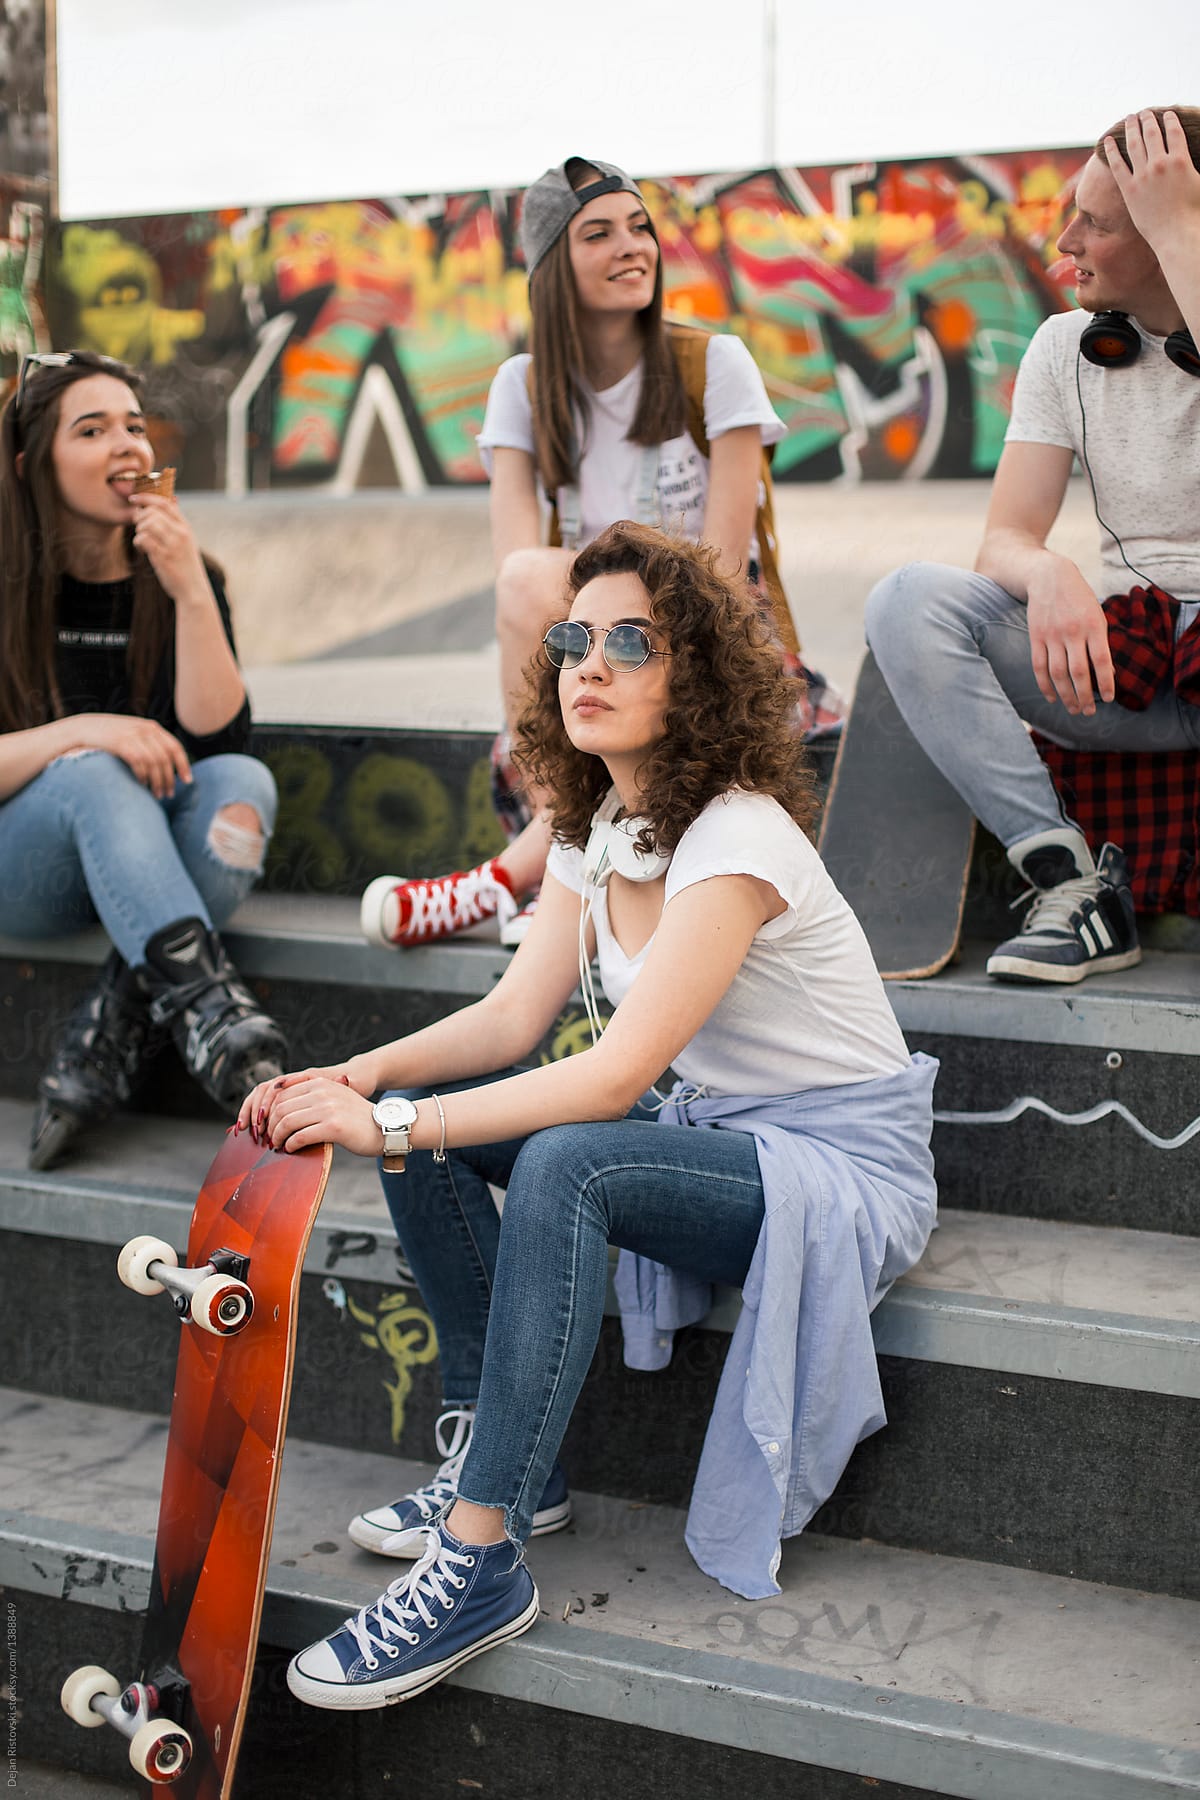 Young people sitting in skate park.